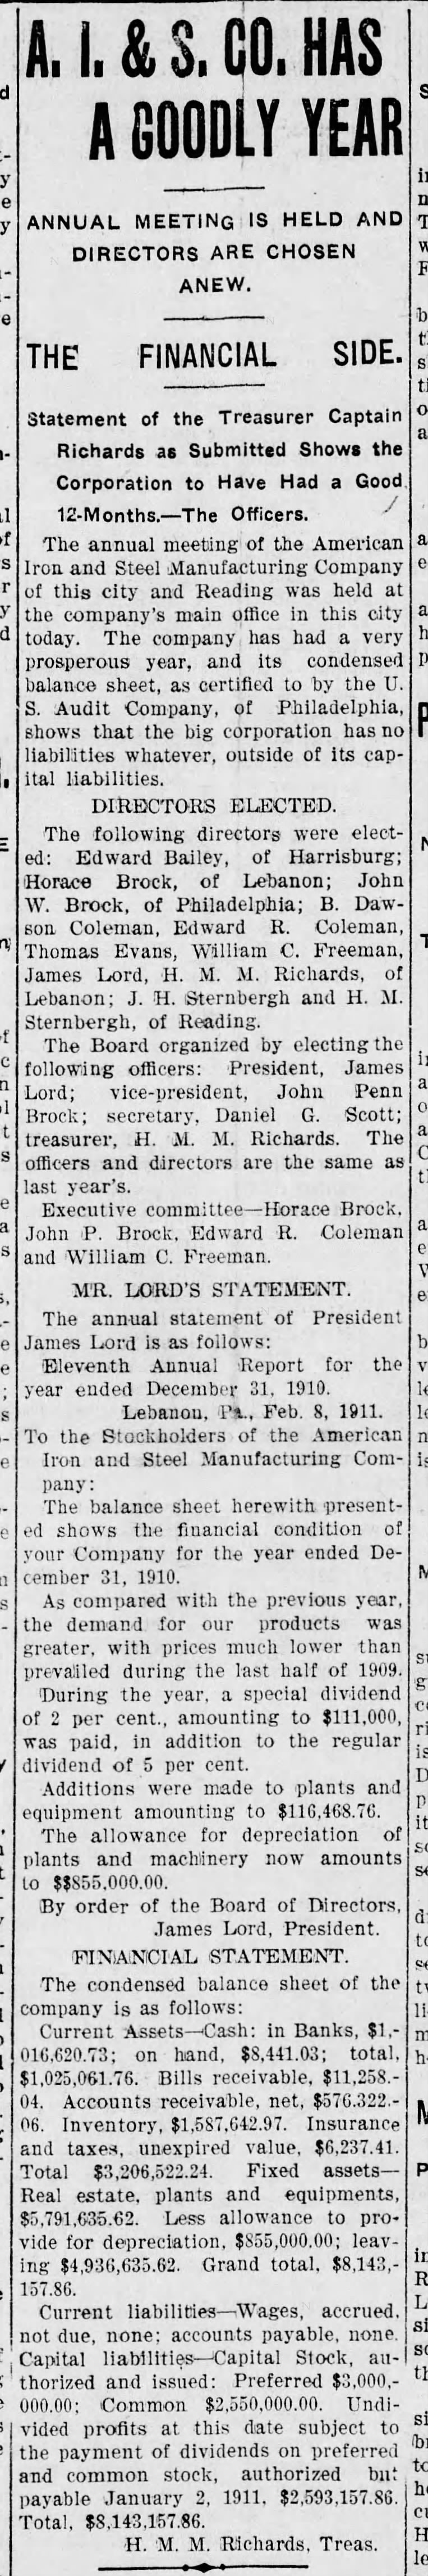 Lebanon Courier and Semiweekly Report Feb 10, 1911  American Iron & Steel has a Goodly Year